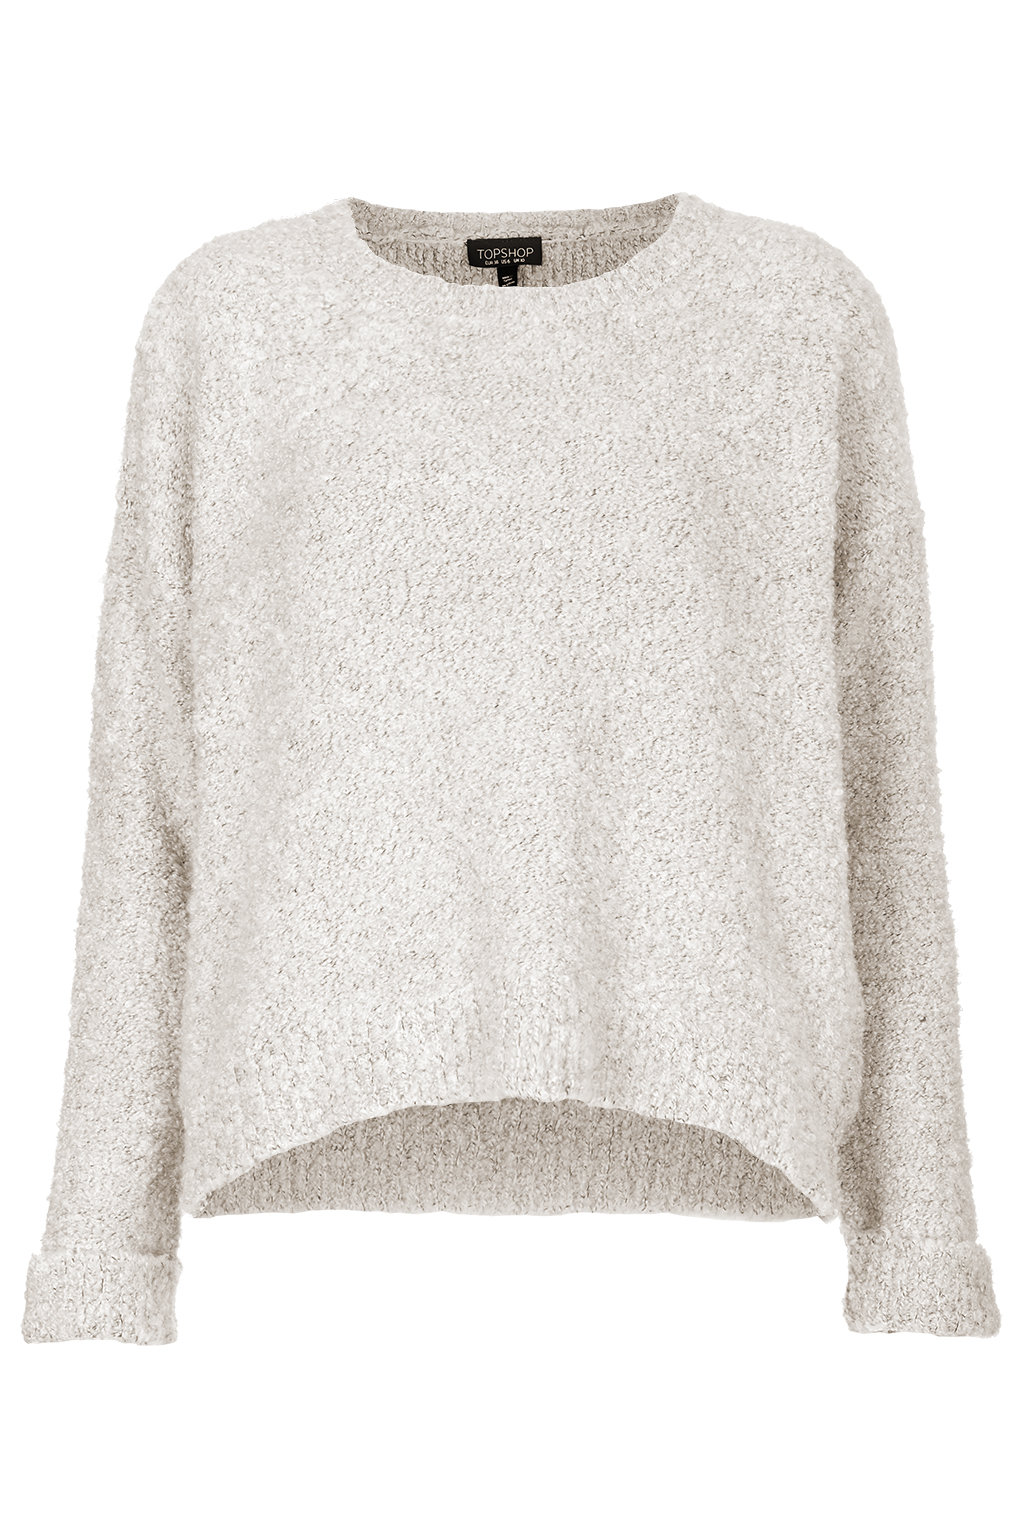 Topshop - Pull (46 €)